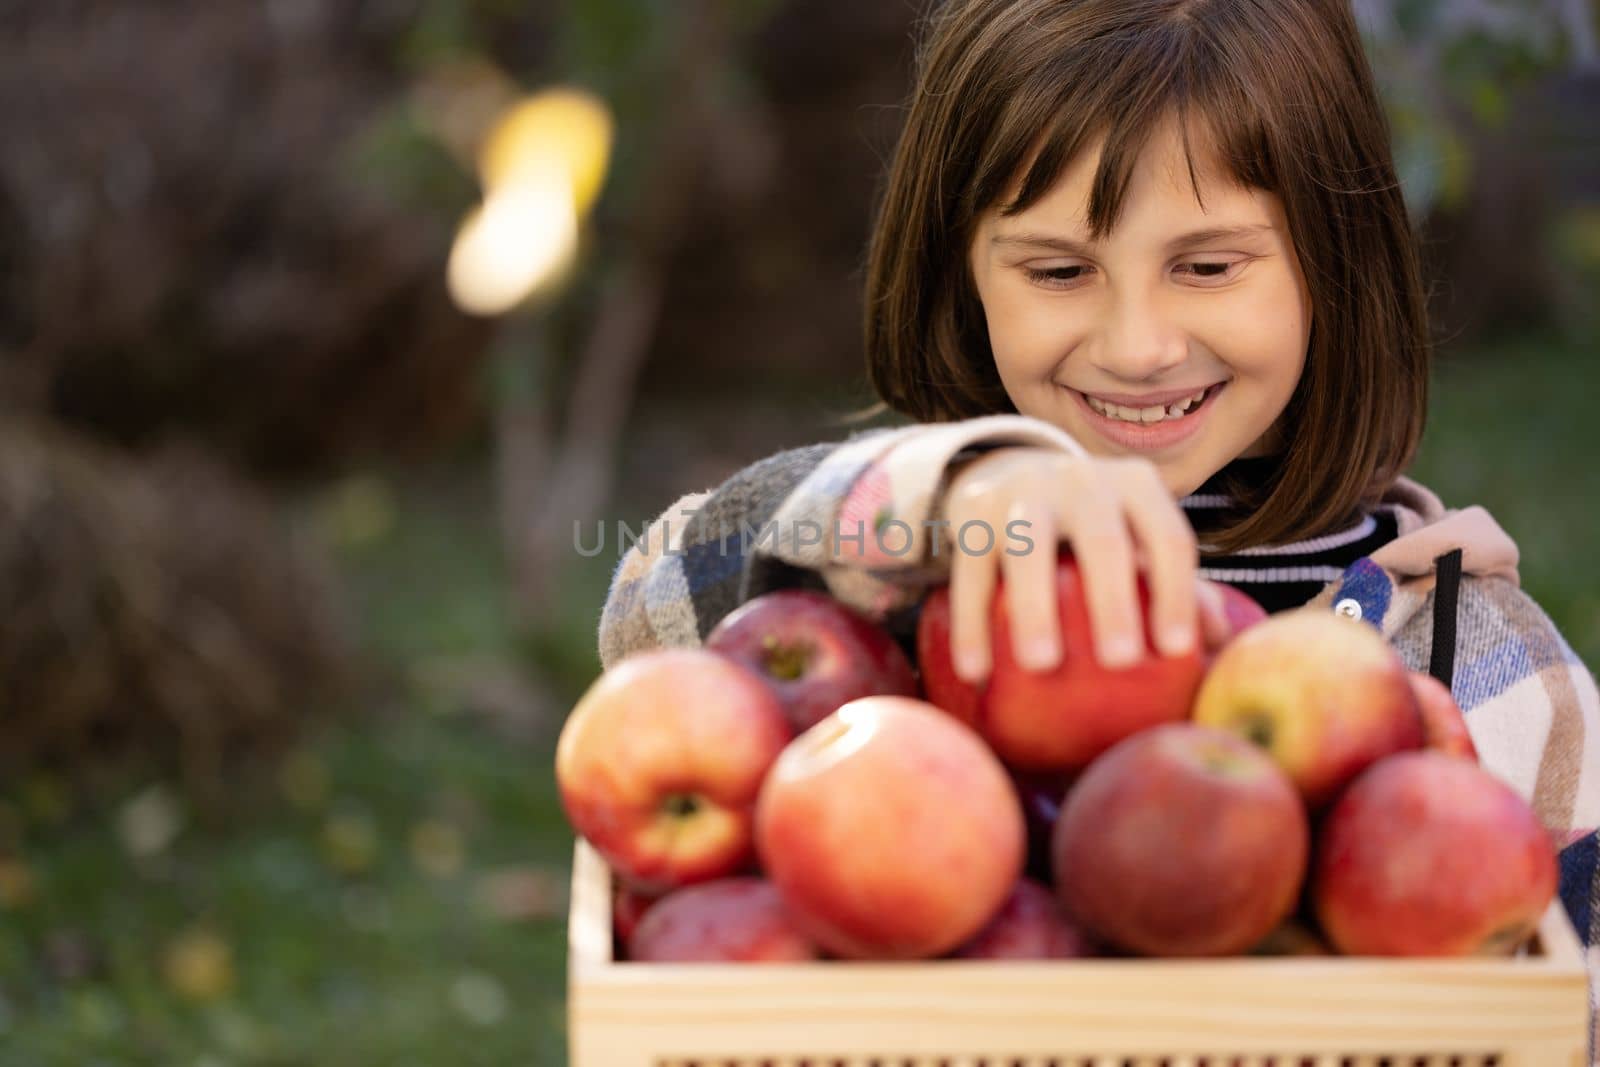 Schoolkid girl's hand take red apple and eats an apple. Female hand choosing organic fruits. Portrait of healthy schoolgirl eating big red apple by uflypro